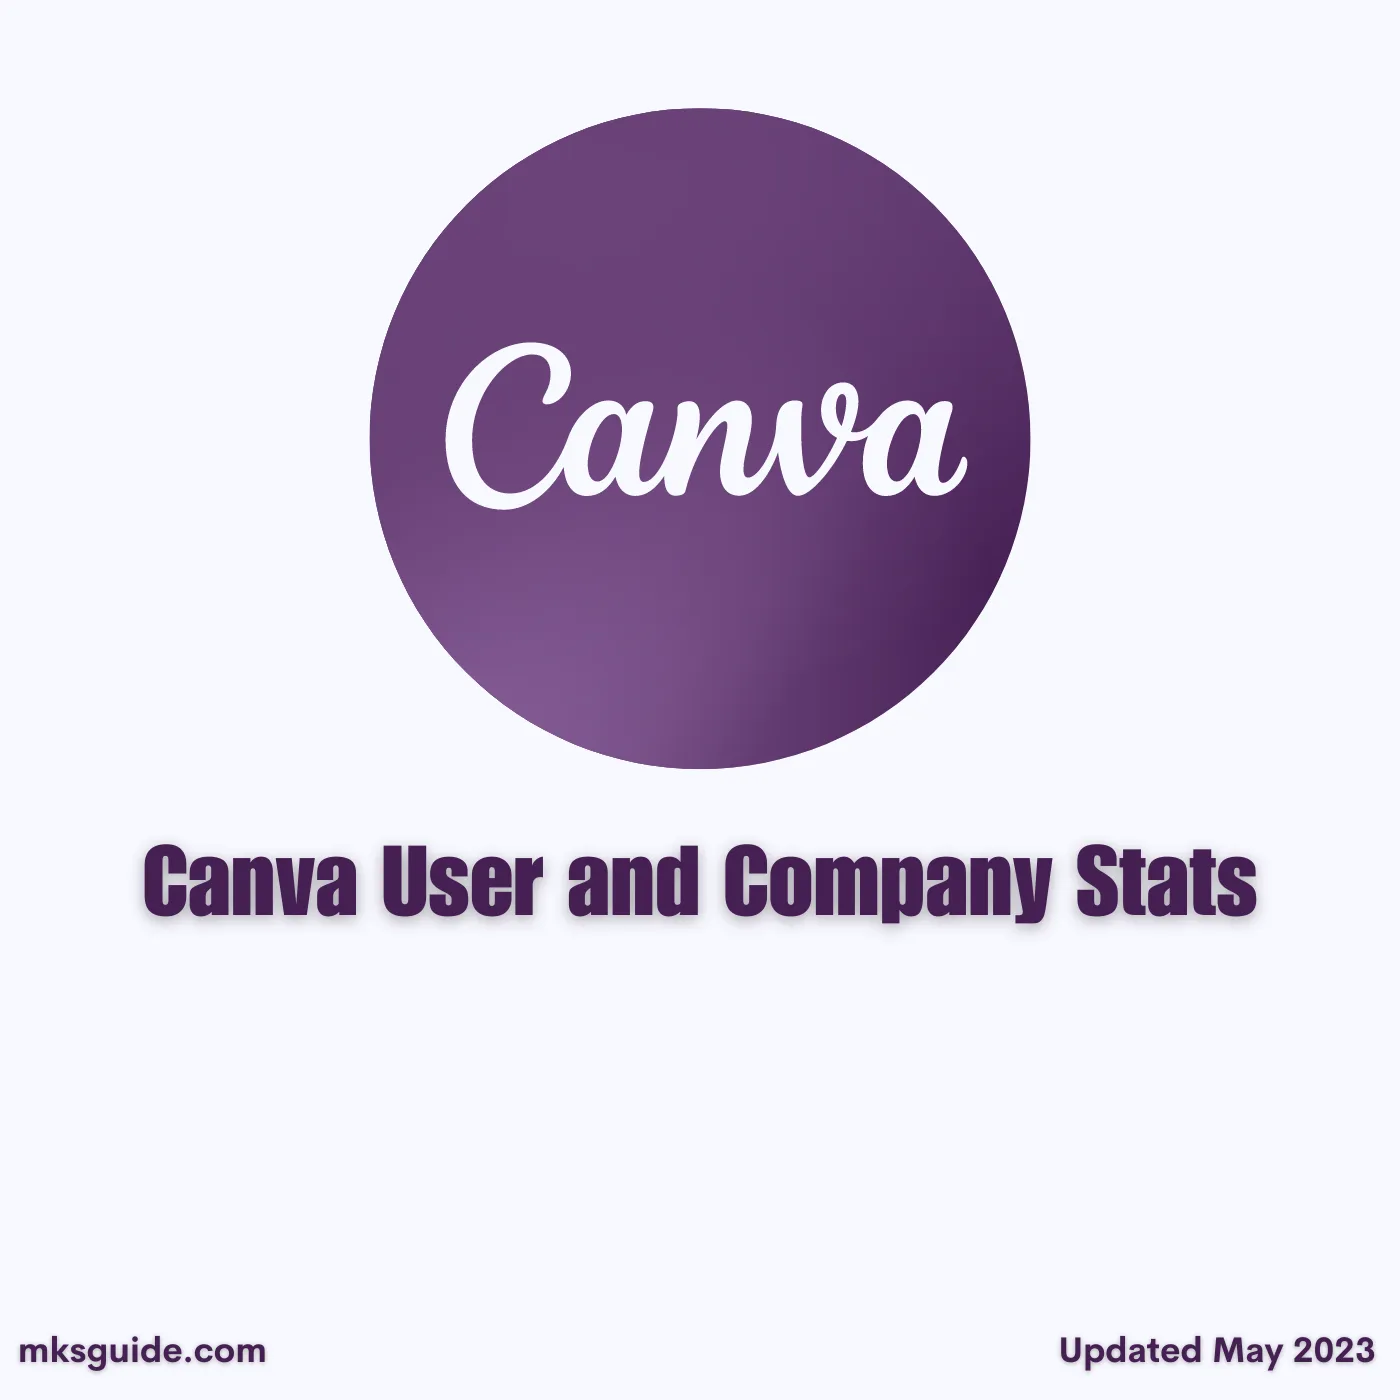 Canva User and Company Stats